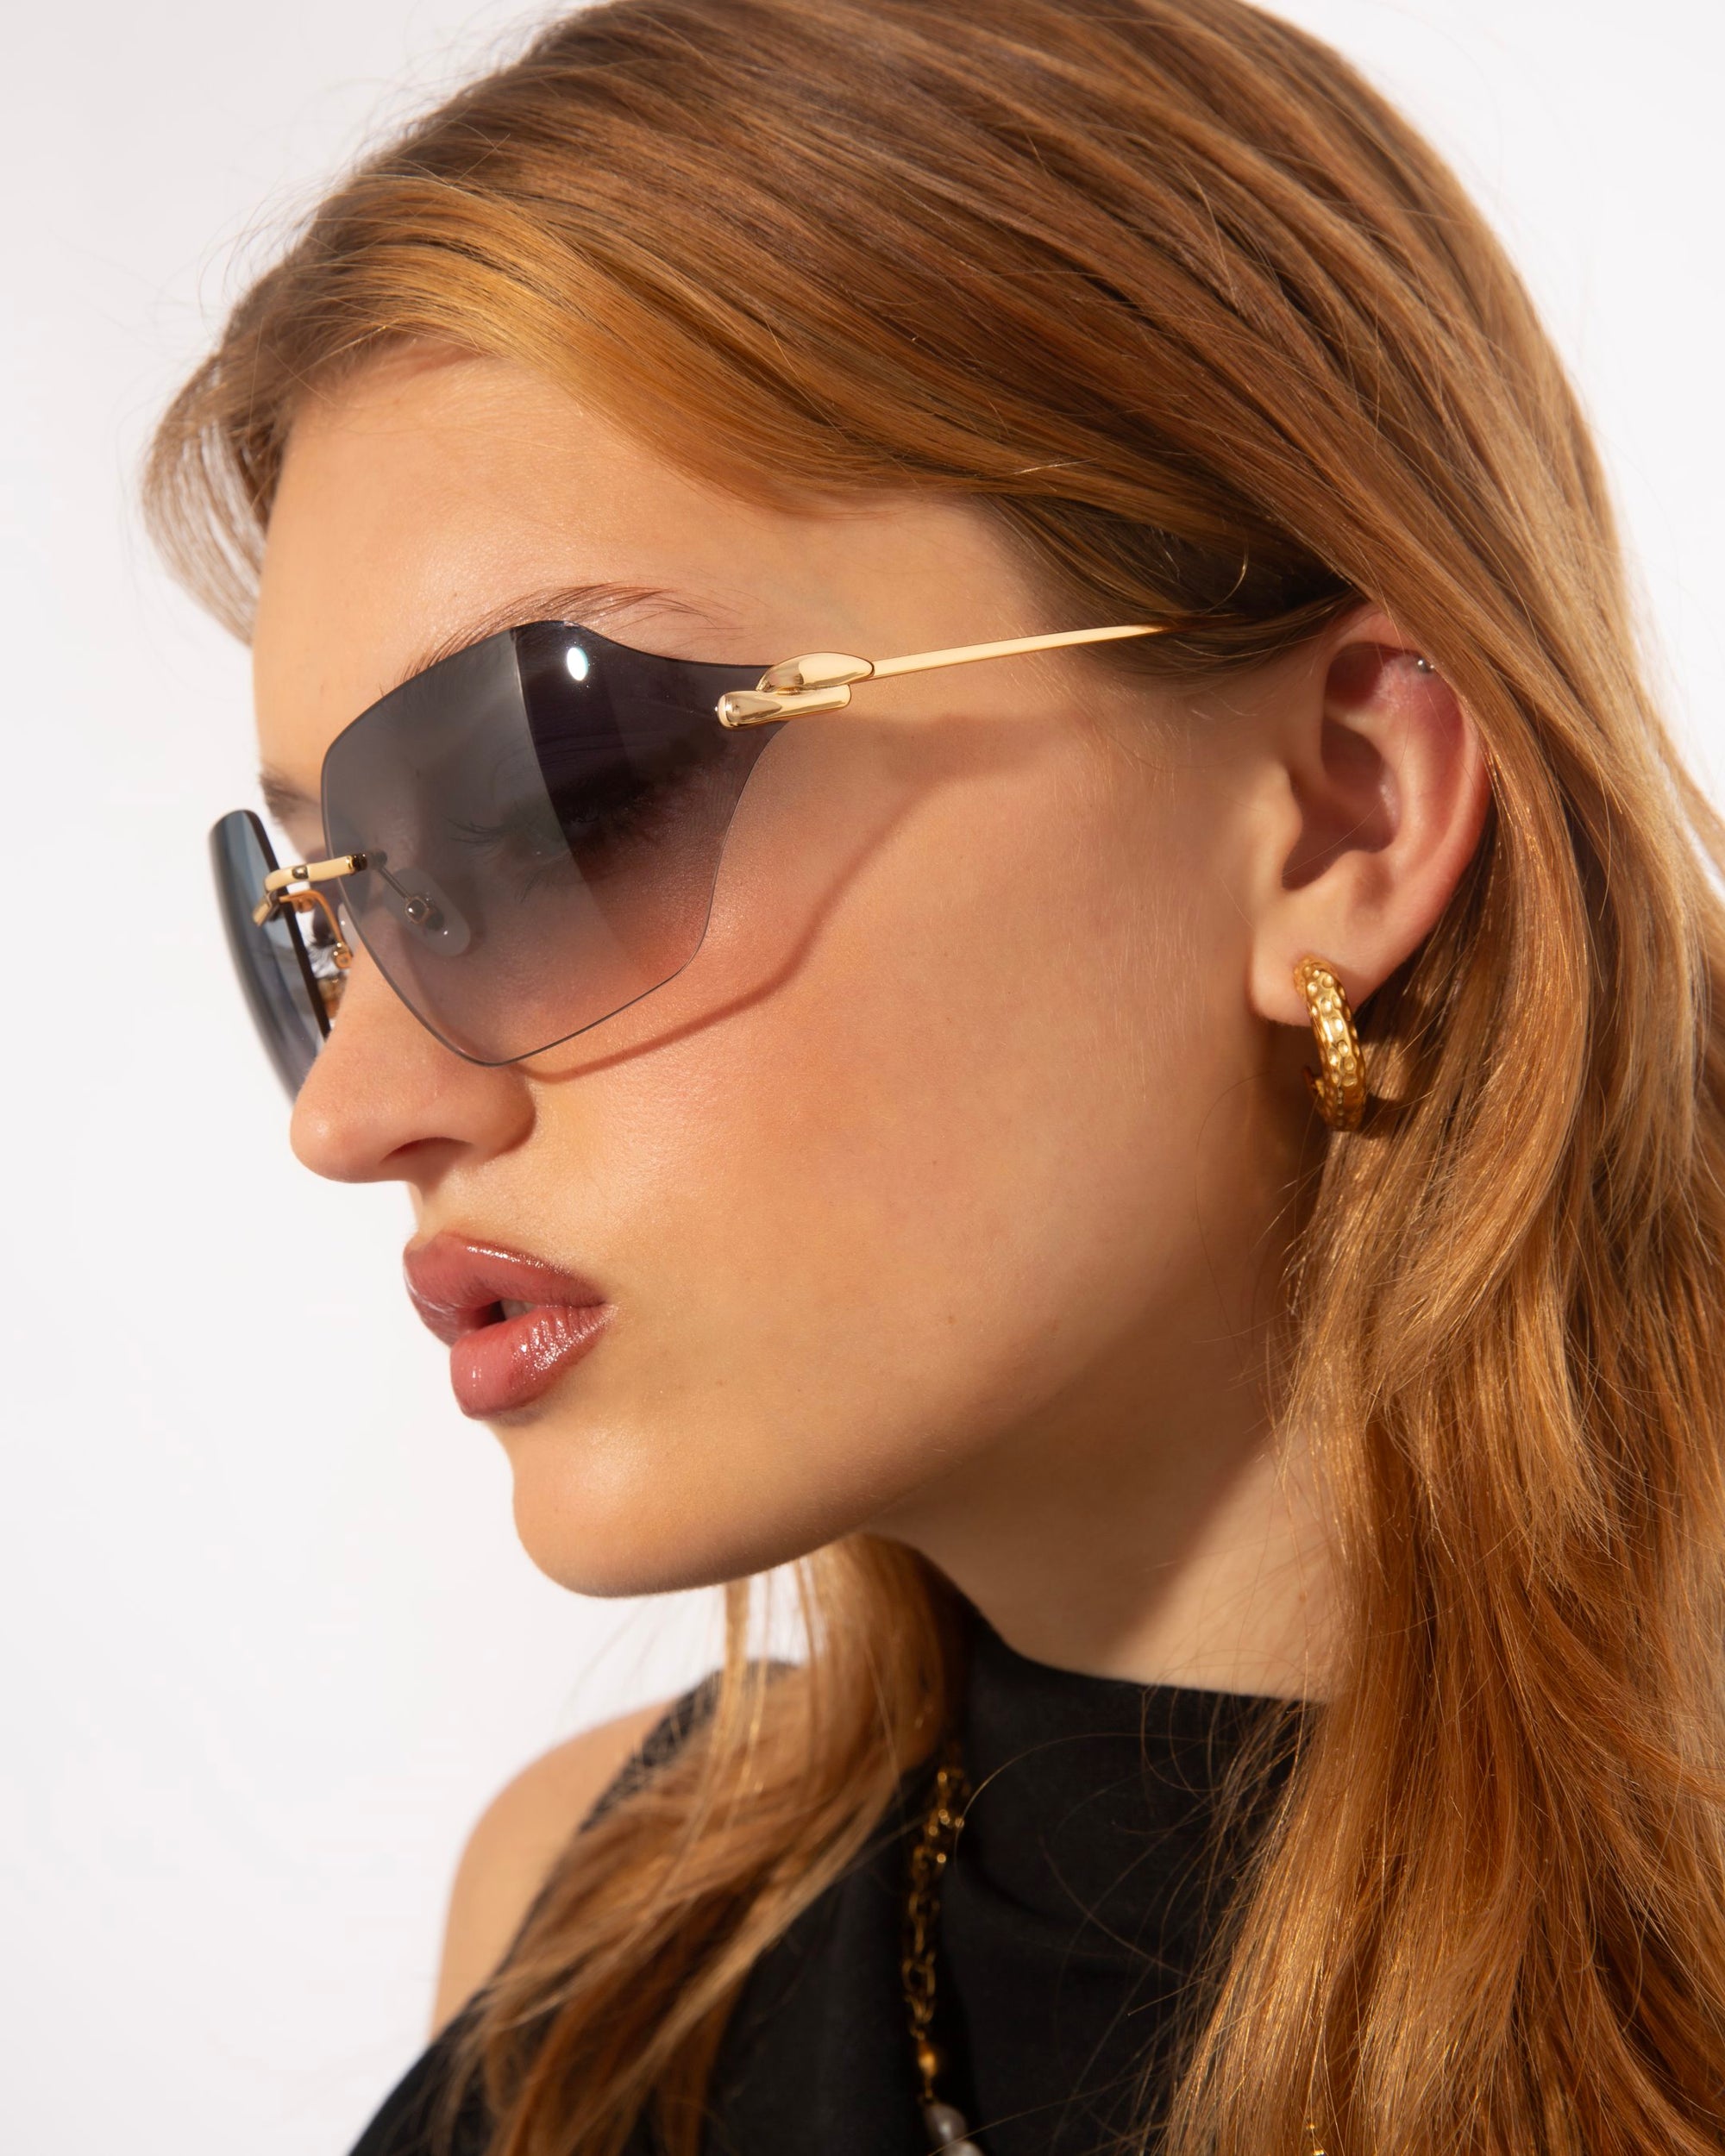 A woman with long, reddish-brown hair is pictured in profile wearing For Art&#39;s Sake® Serpent II sunglasses with jade-stone nose pads and gold hoop earrings. She is dressed in a black top, and the background is plain white. The image focuses on her head and shoulders, highlighting her accessories.